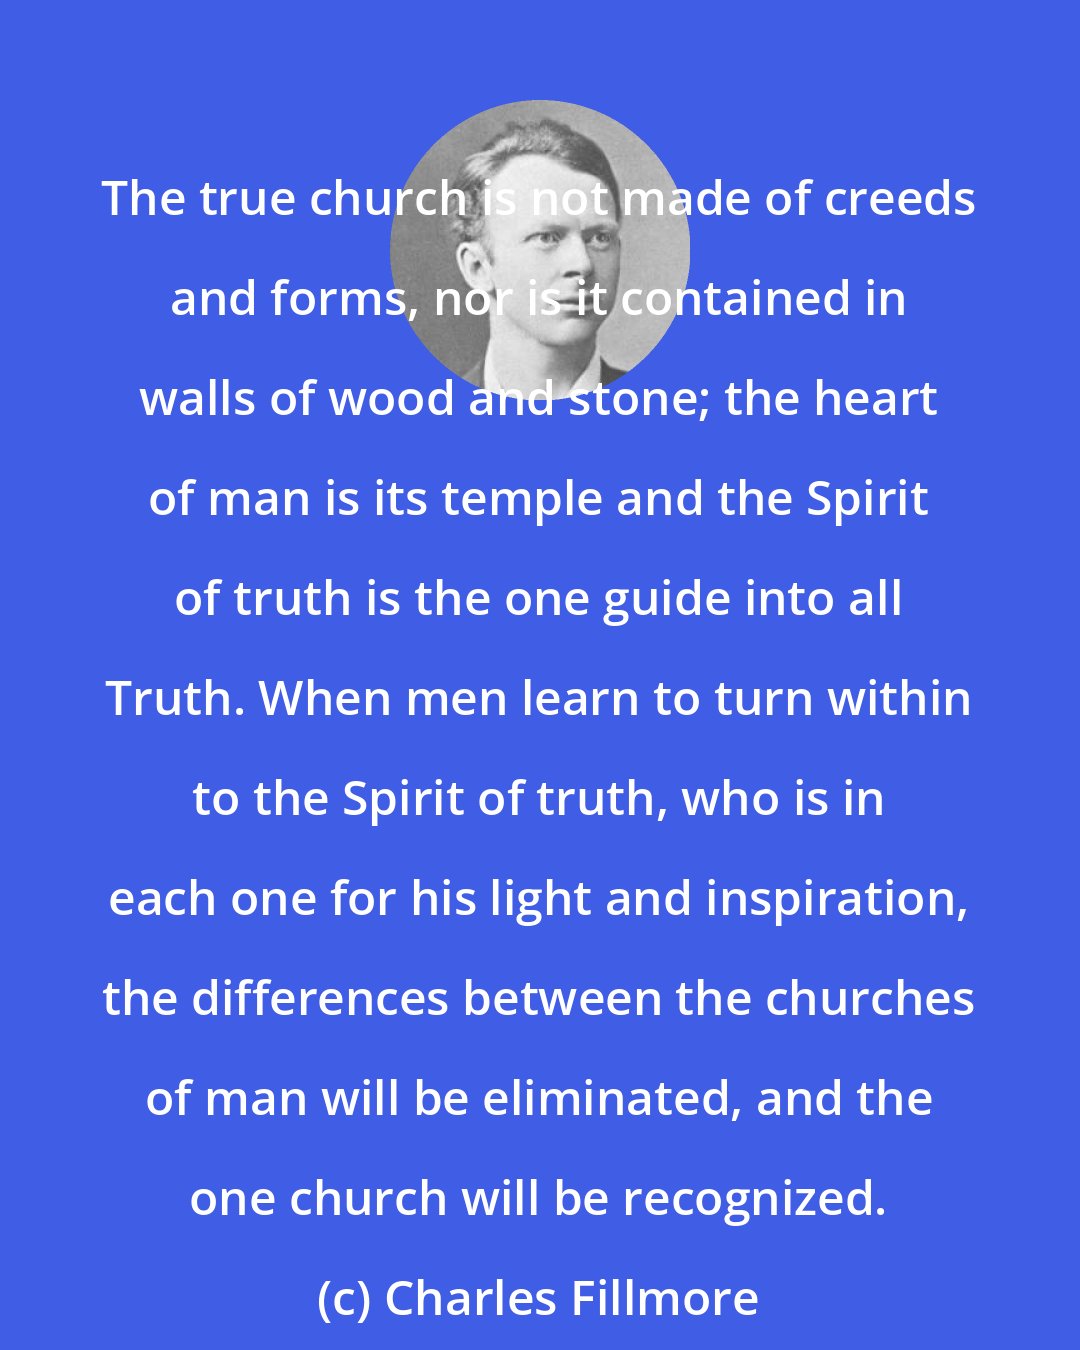 Charles Fillmore: The true church is not made of creeds and forms, nor is it contained in walls of wood and stone; the heart of man is its temple and the Spirit of truth is the one guide into all Truth. When men learn to turn within to the Spirit of truth, who is in each one for his light and inspiration, the differences between the churches of man will be eliminated, and the one church will be recognized.